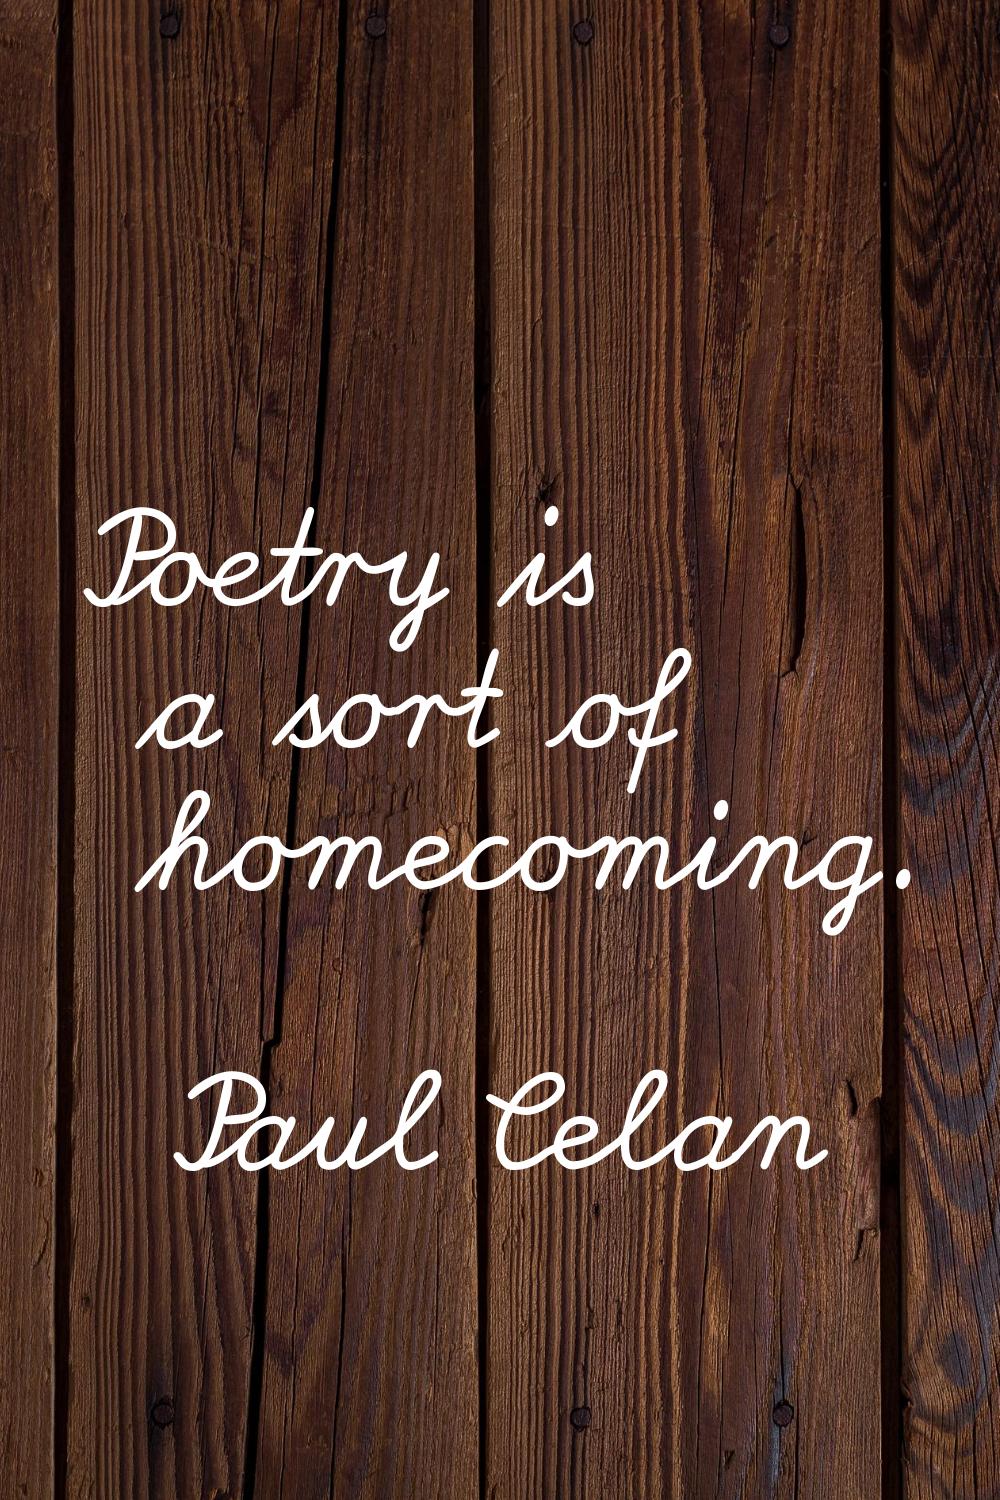 Poetry is a sort of homecoming.